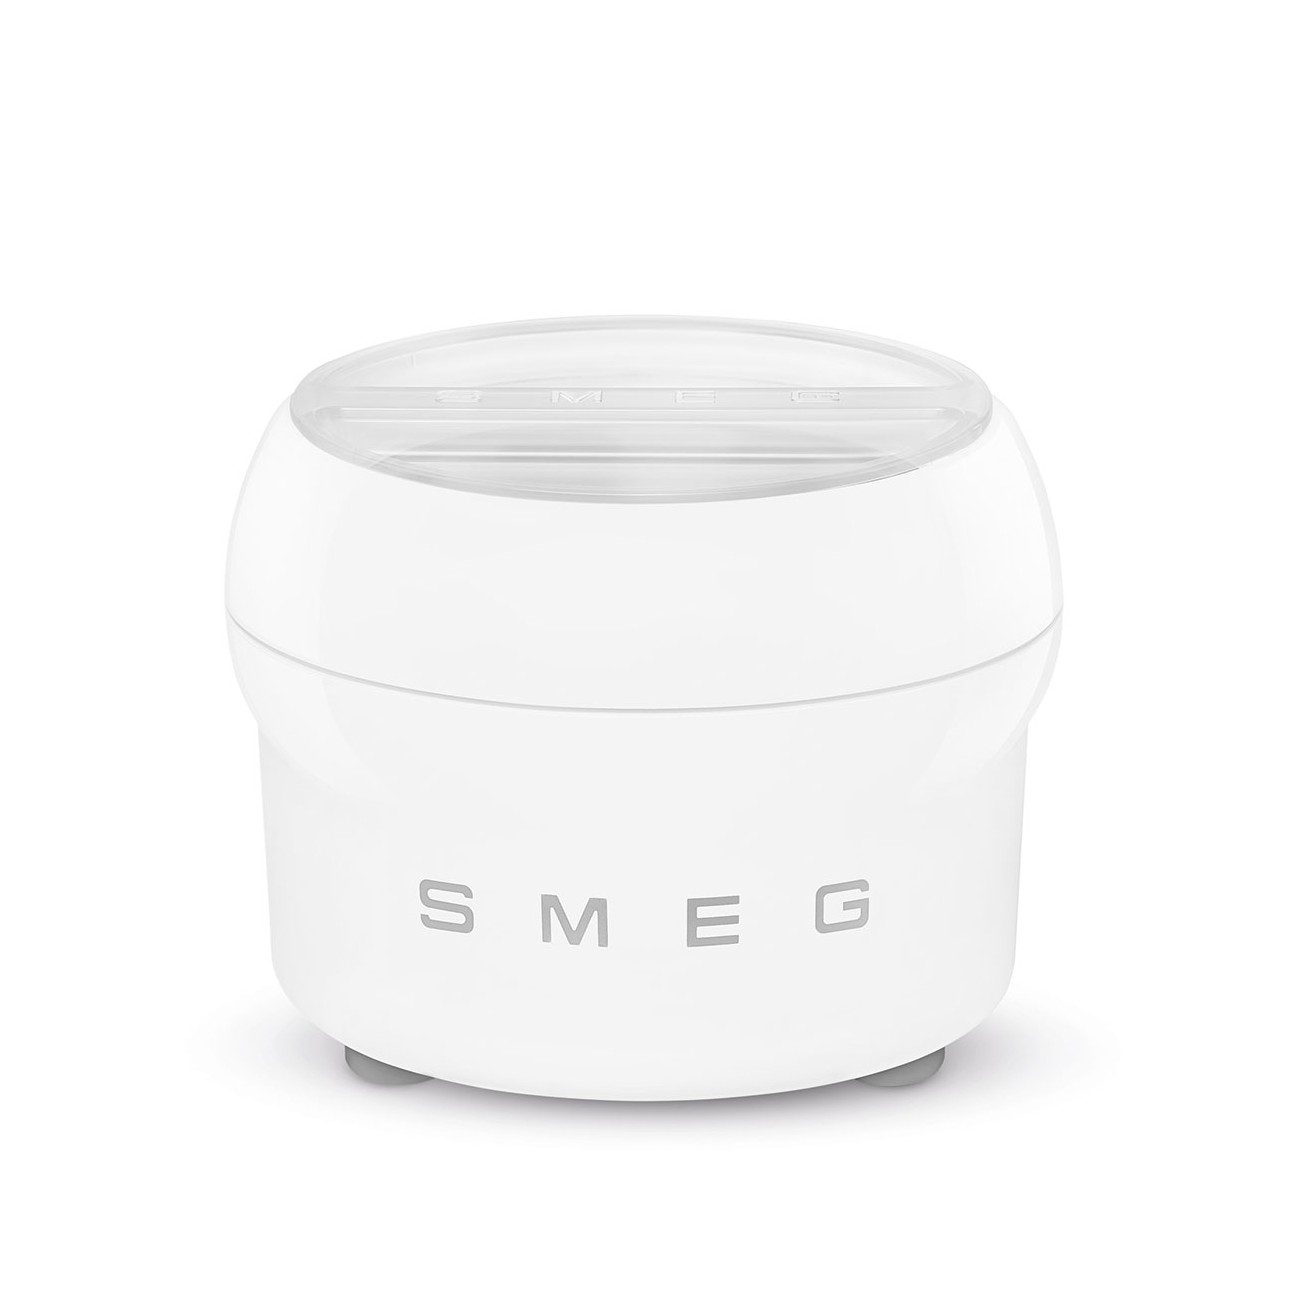 Smeg Accessories for Stand Mixer Ice Cream Maker